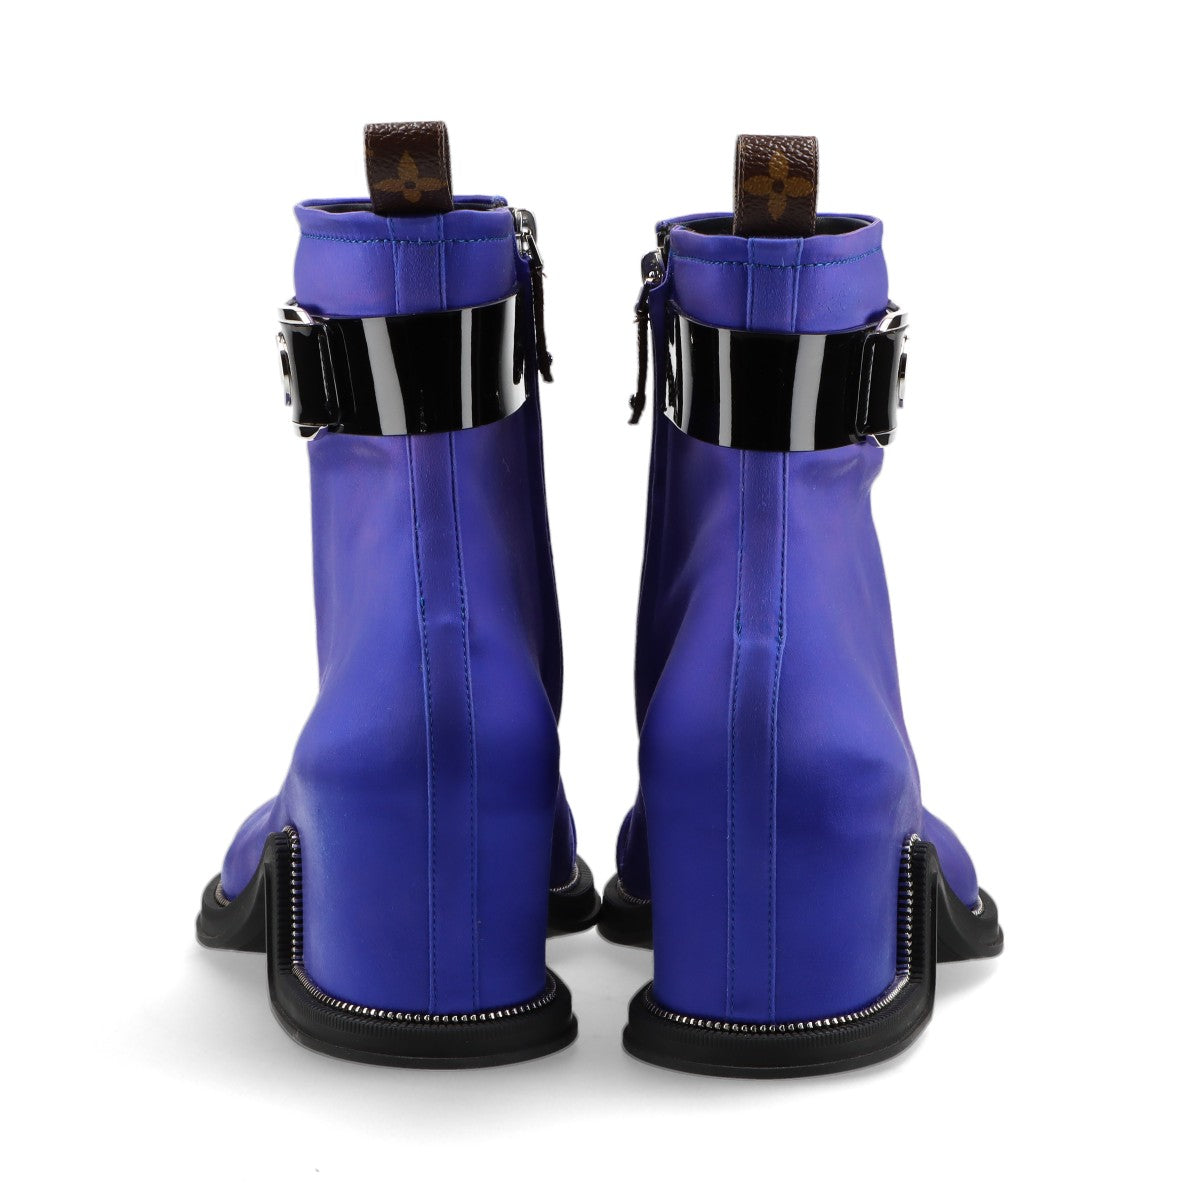 Louis Vuitton moonlight line 22 years Satin x Leather Short Boots EU38 Ladies' Blue x Black NL0212 Box There is a bag